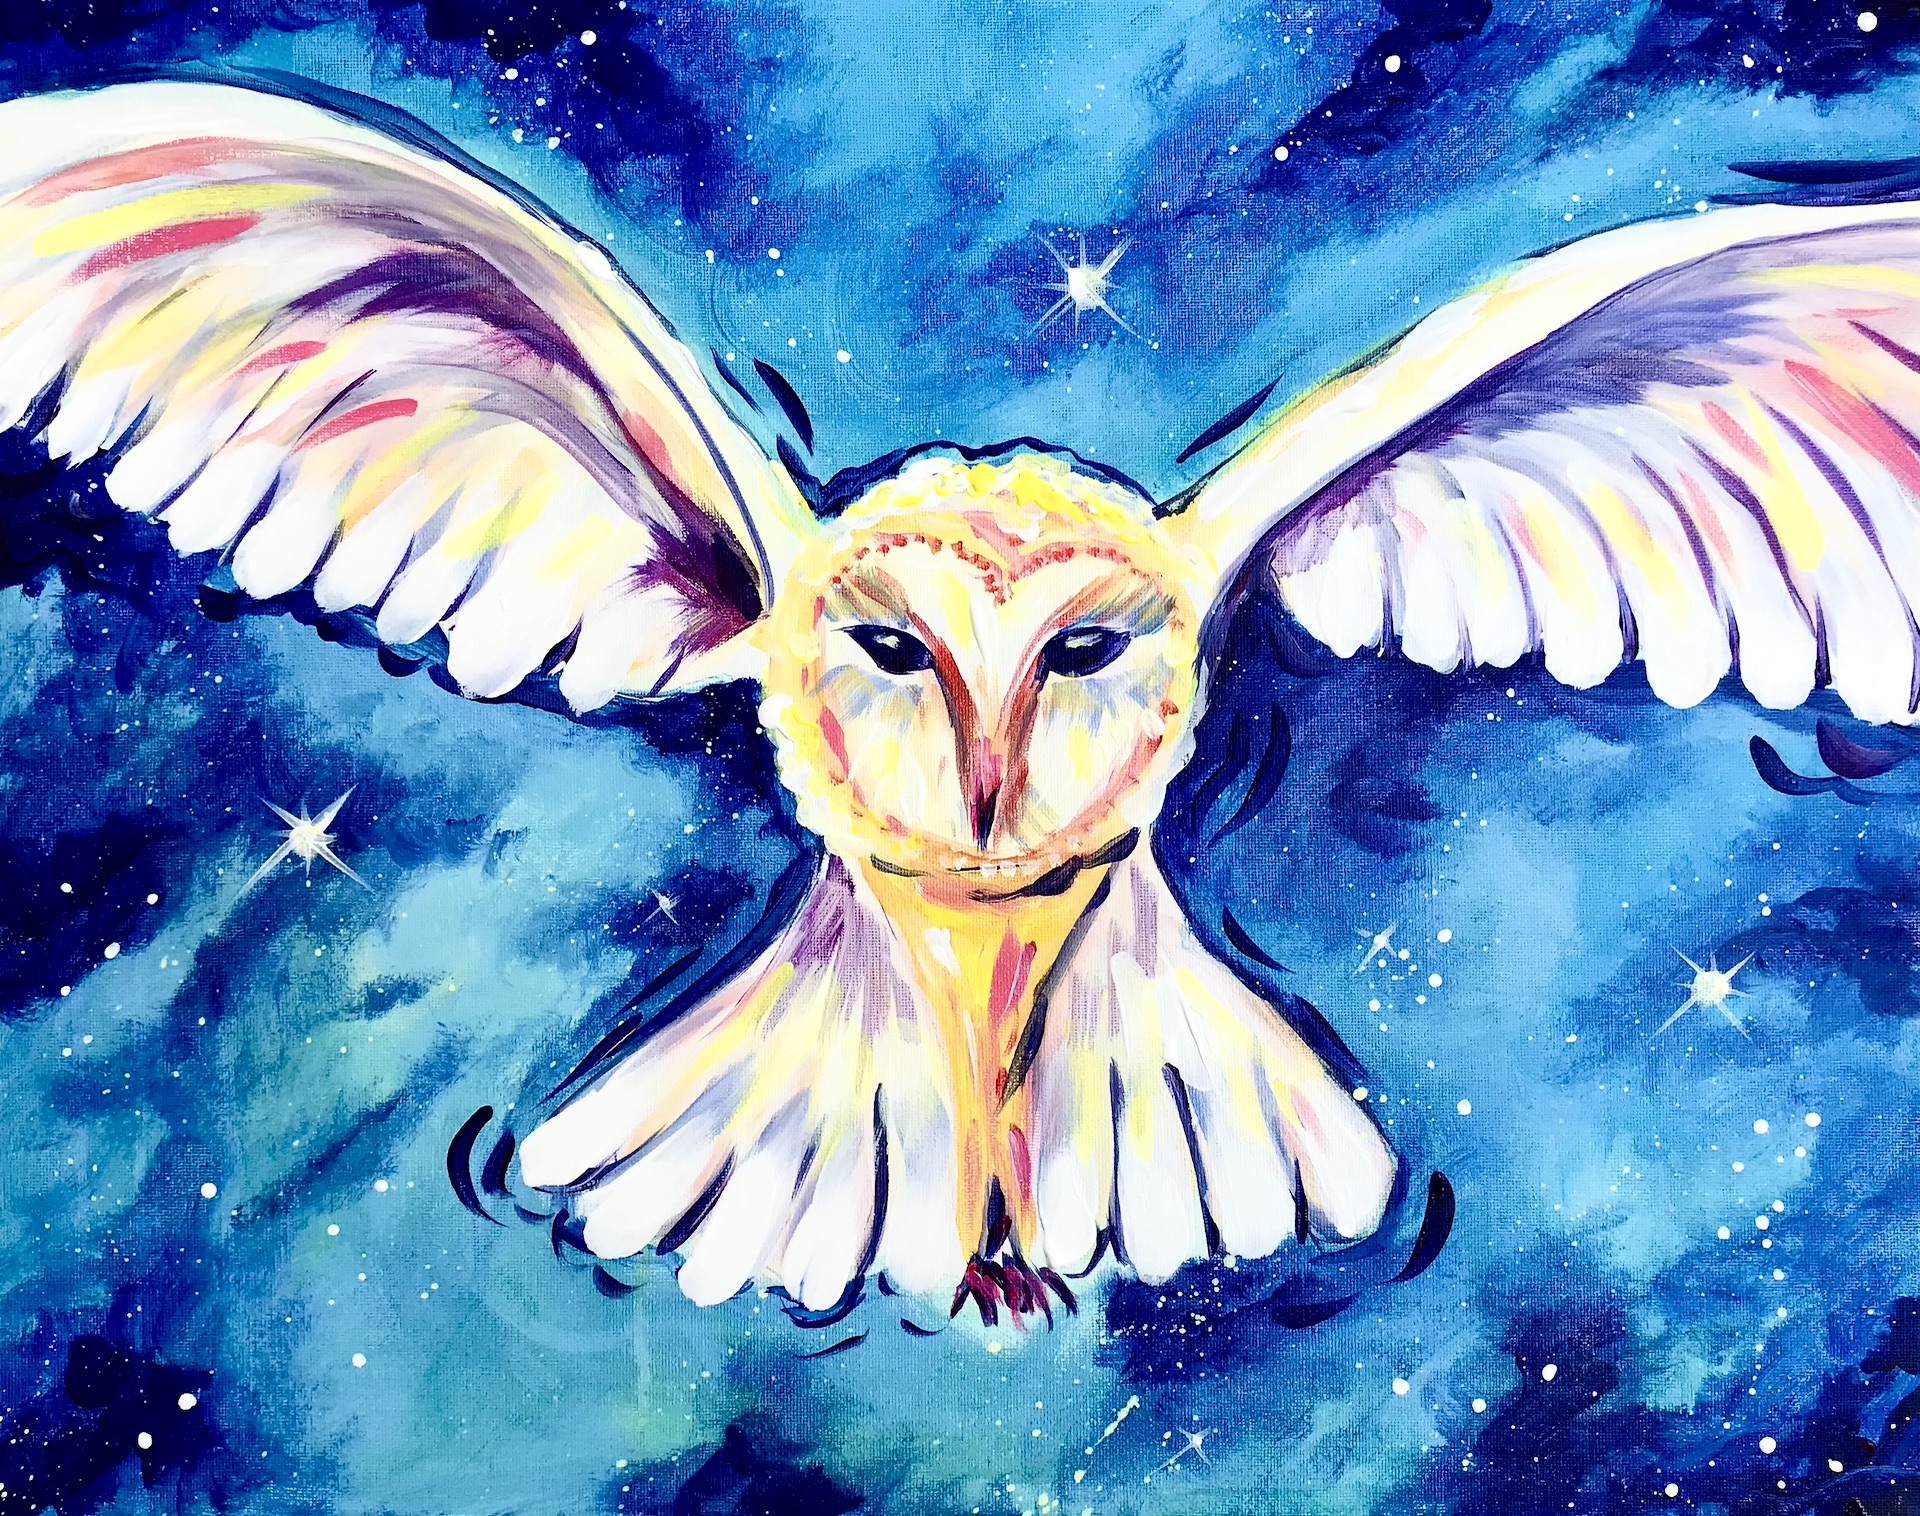 A Majestic Snow Owl  experience project by Yaymaker